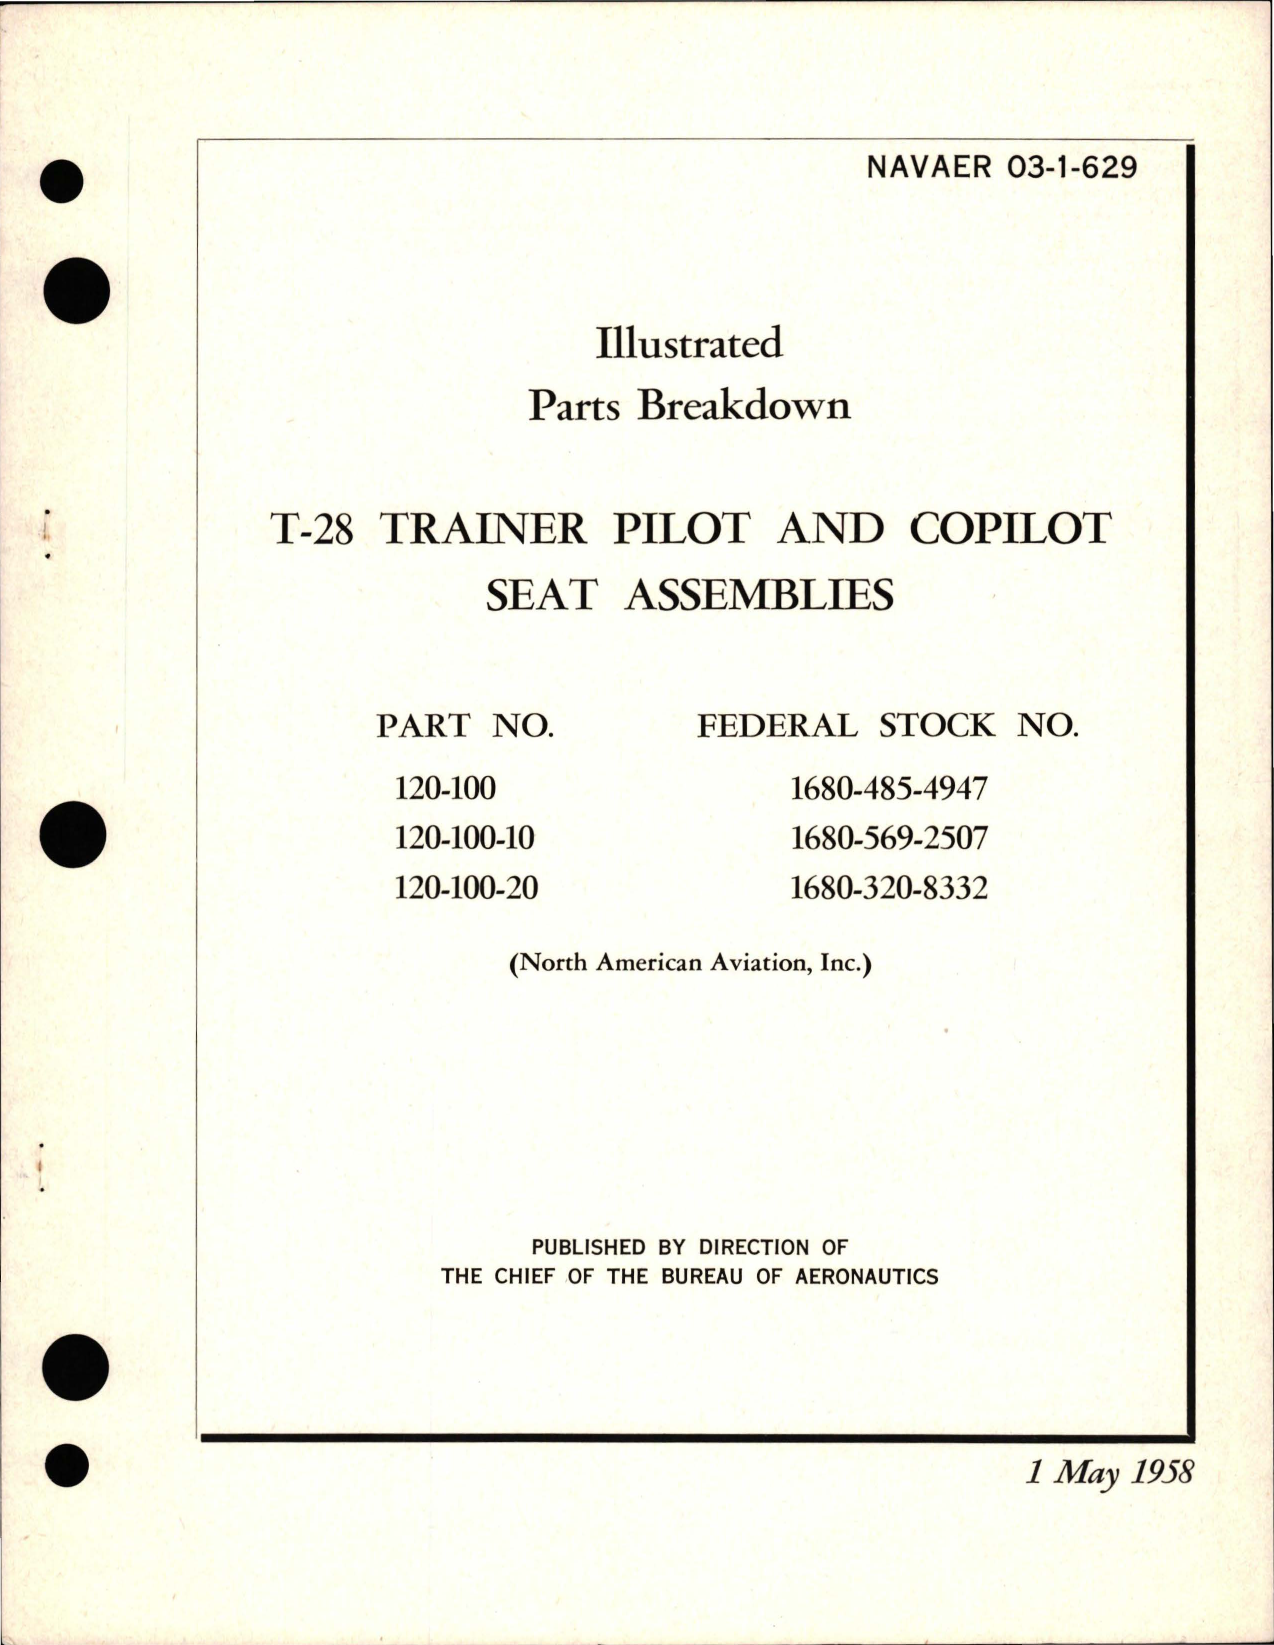 Sample page 1 from AirCorps Library document: Illustrated Parts Pilot and Copilot Seat Assembly for T-28 - Parts 120-100, 120-100-10, and 120-100-20 